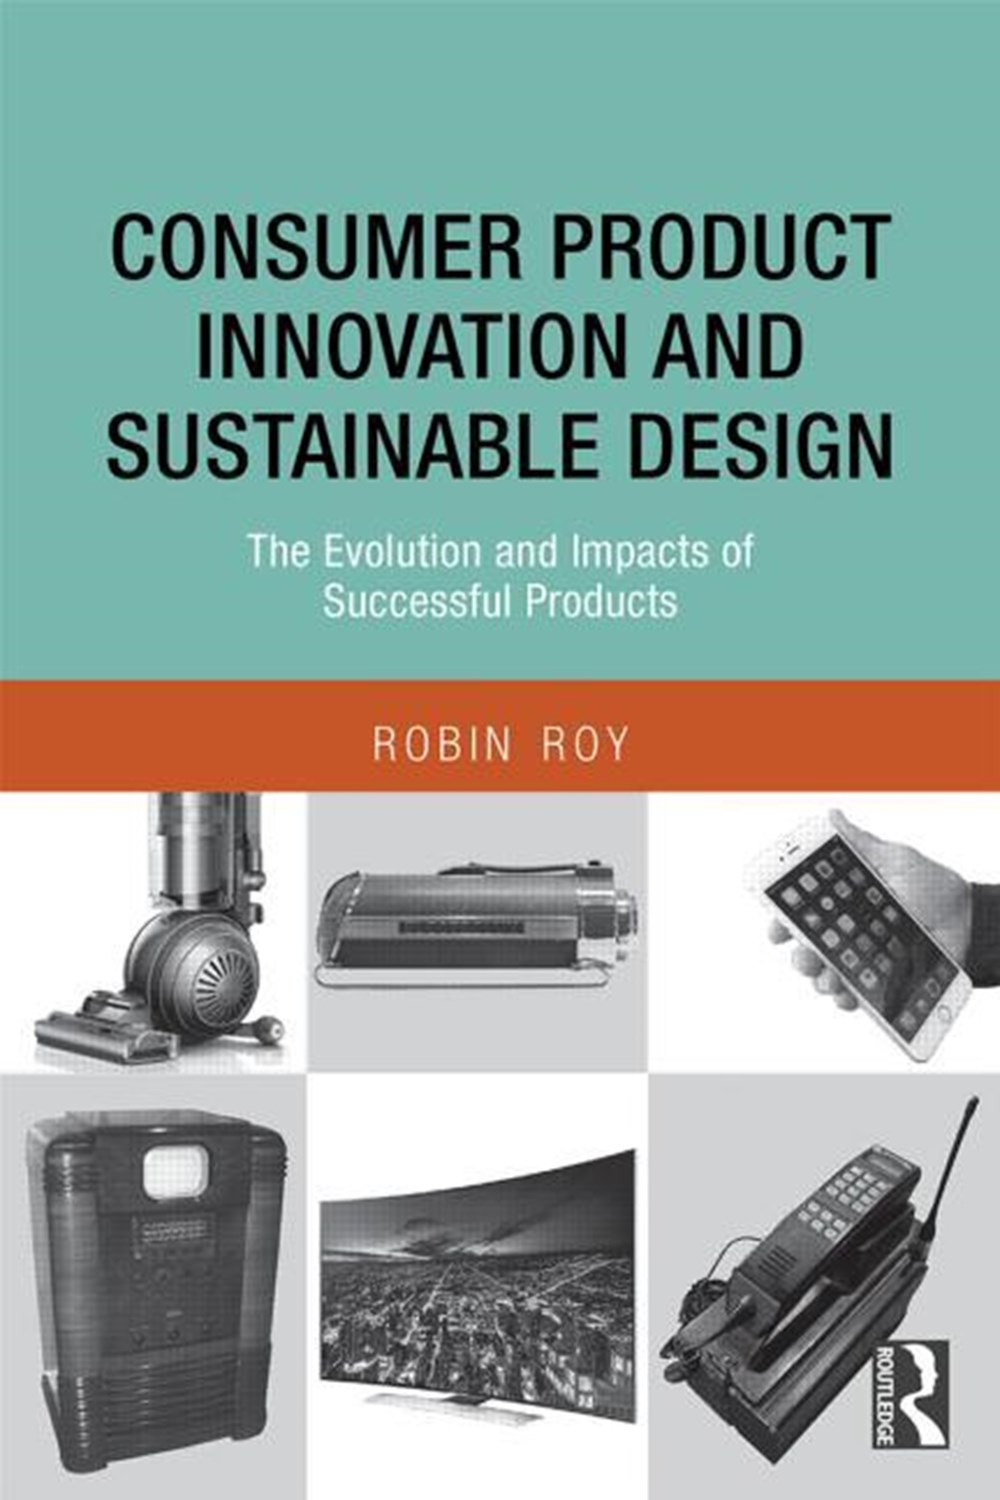 Consumer Product Innovation and Sustainable Design: The Evolution and Impacts of Successful Products